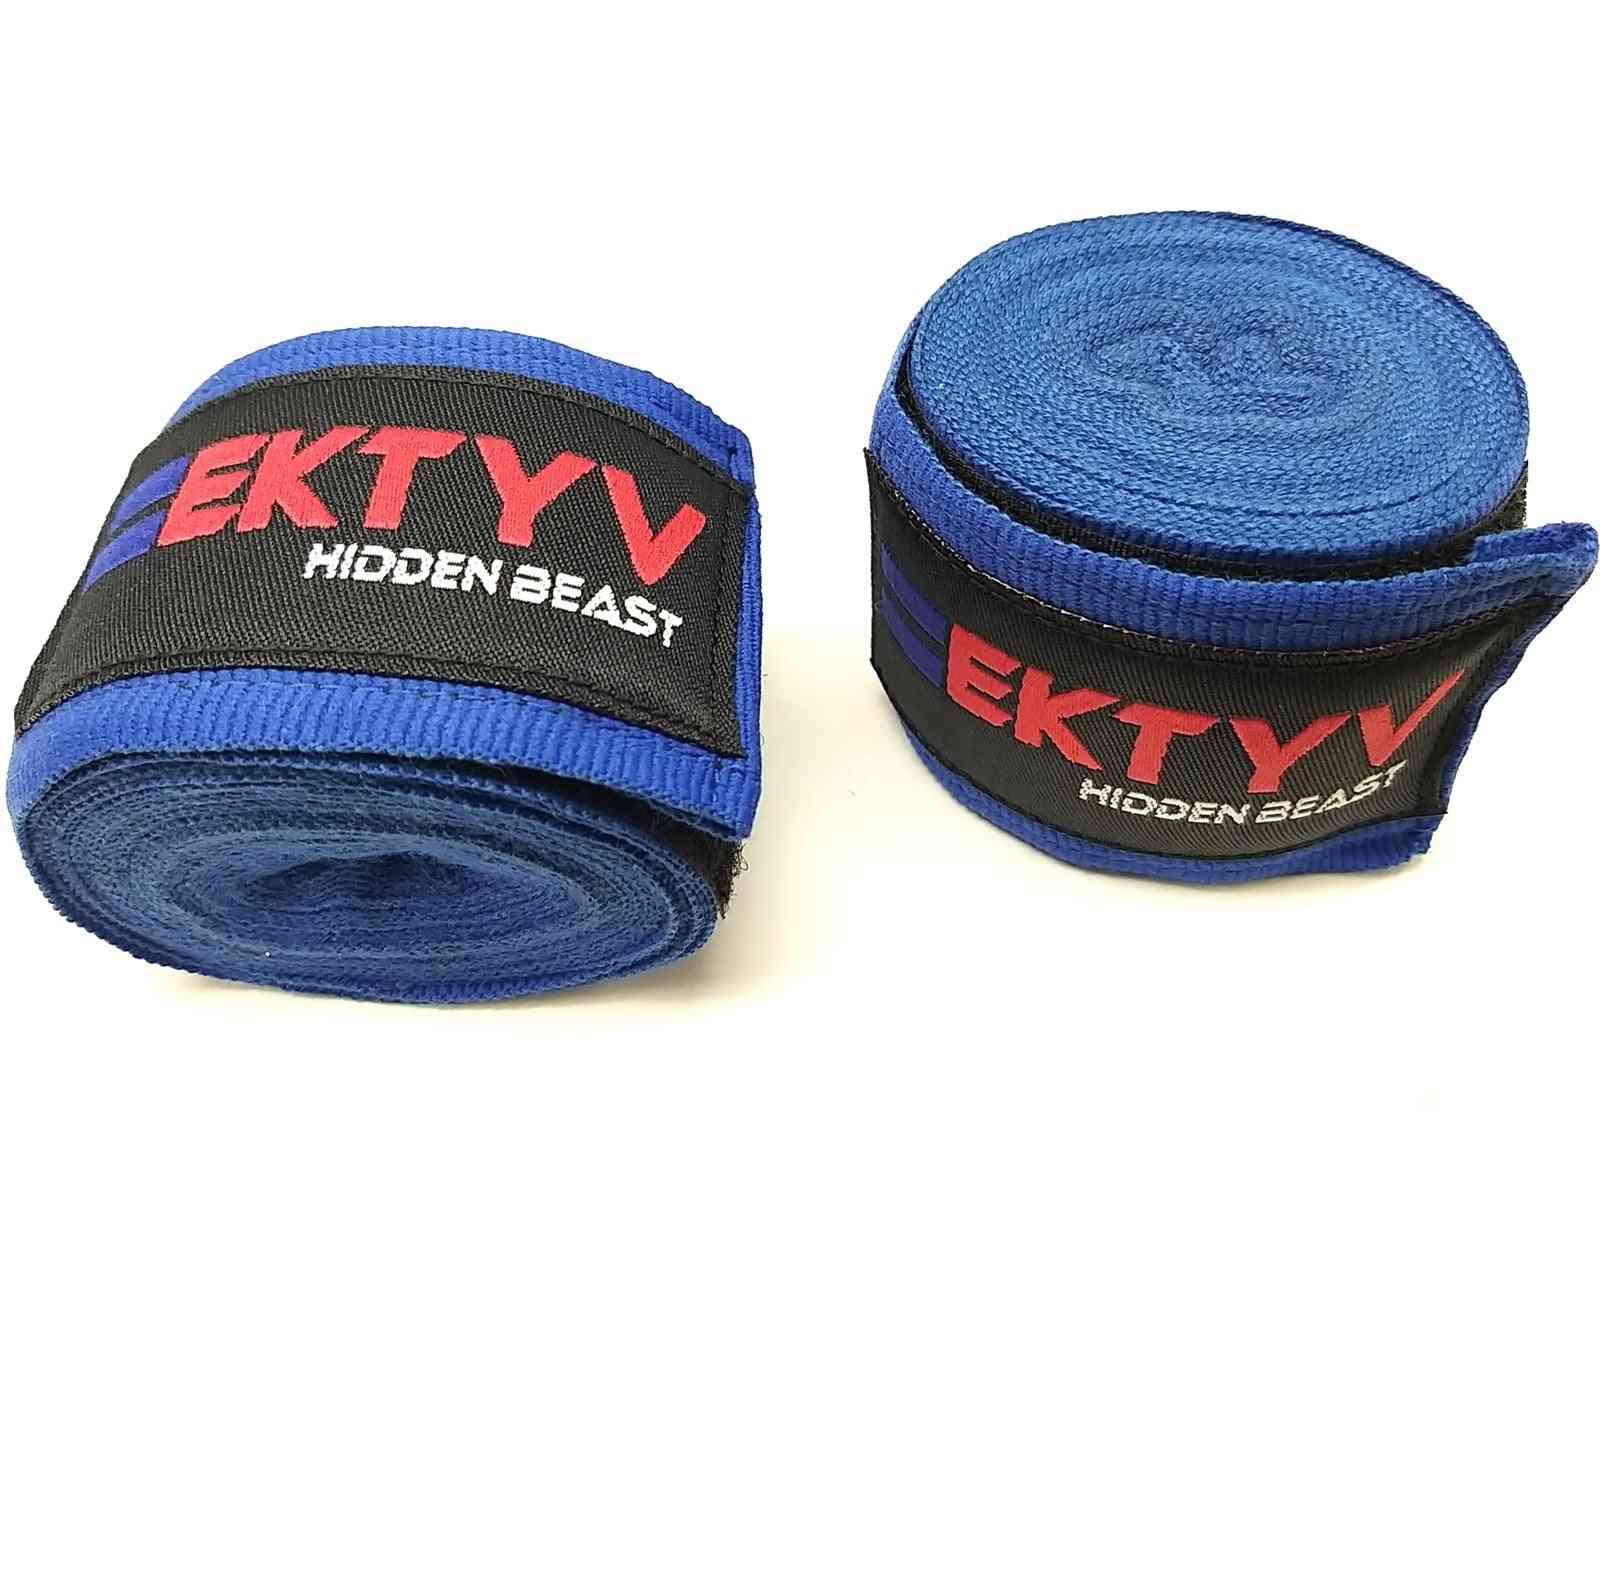 Hand Wraps Fist Bandages For Sports Training